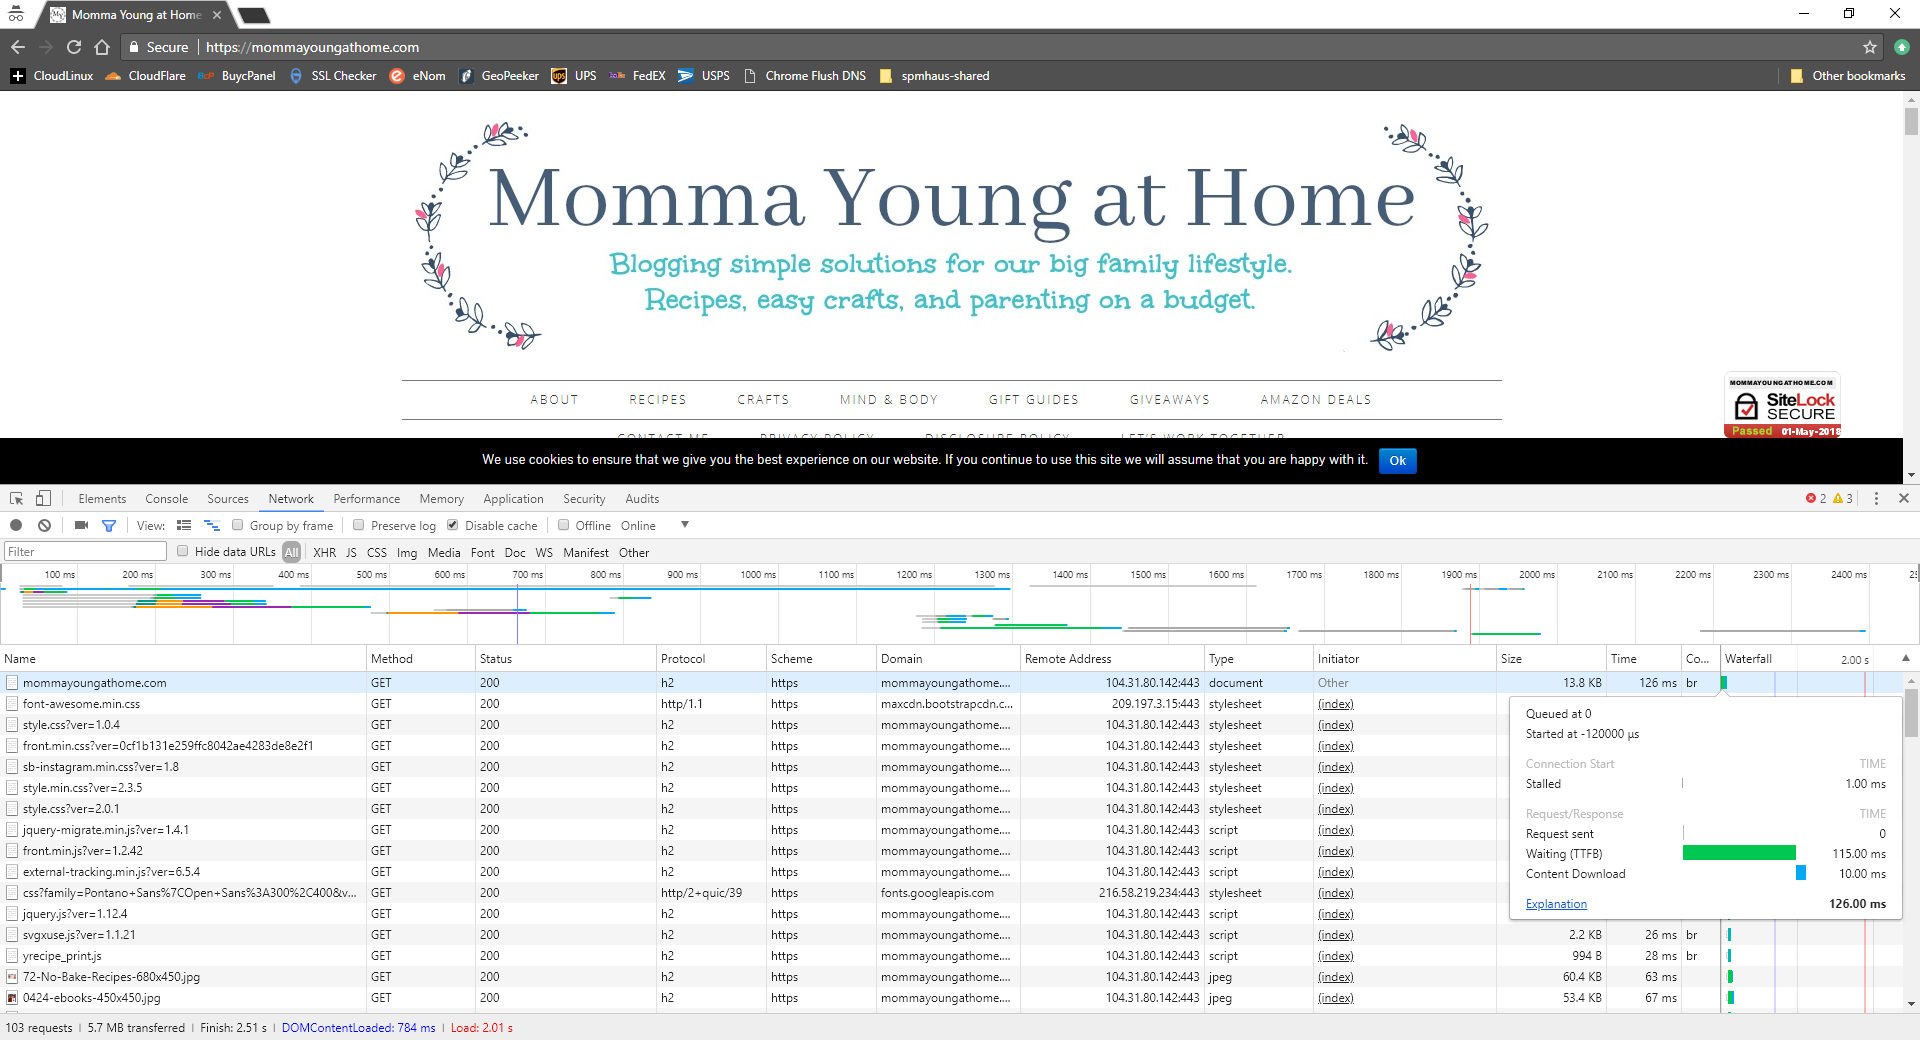 www.mommayoungathome.com Speed Comparison After